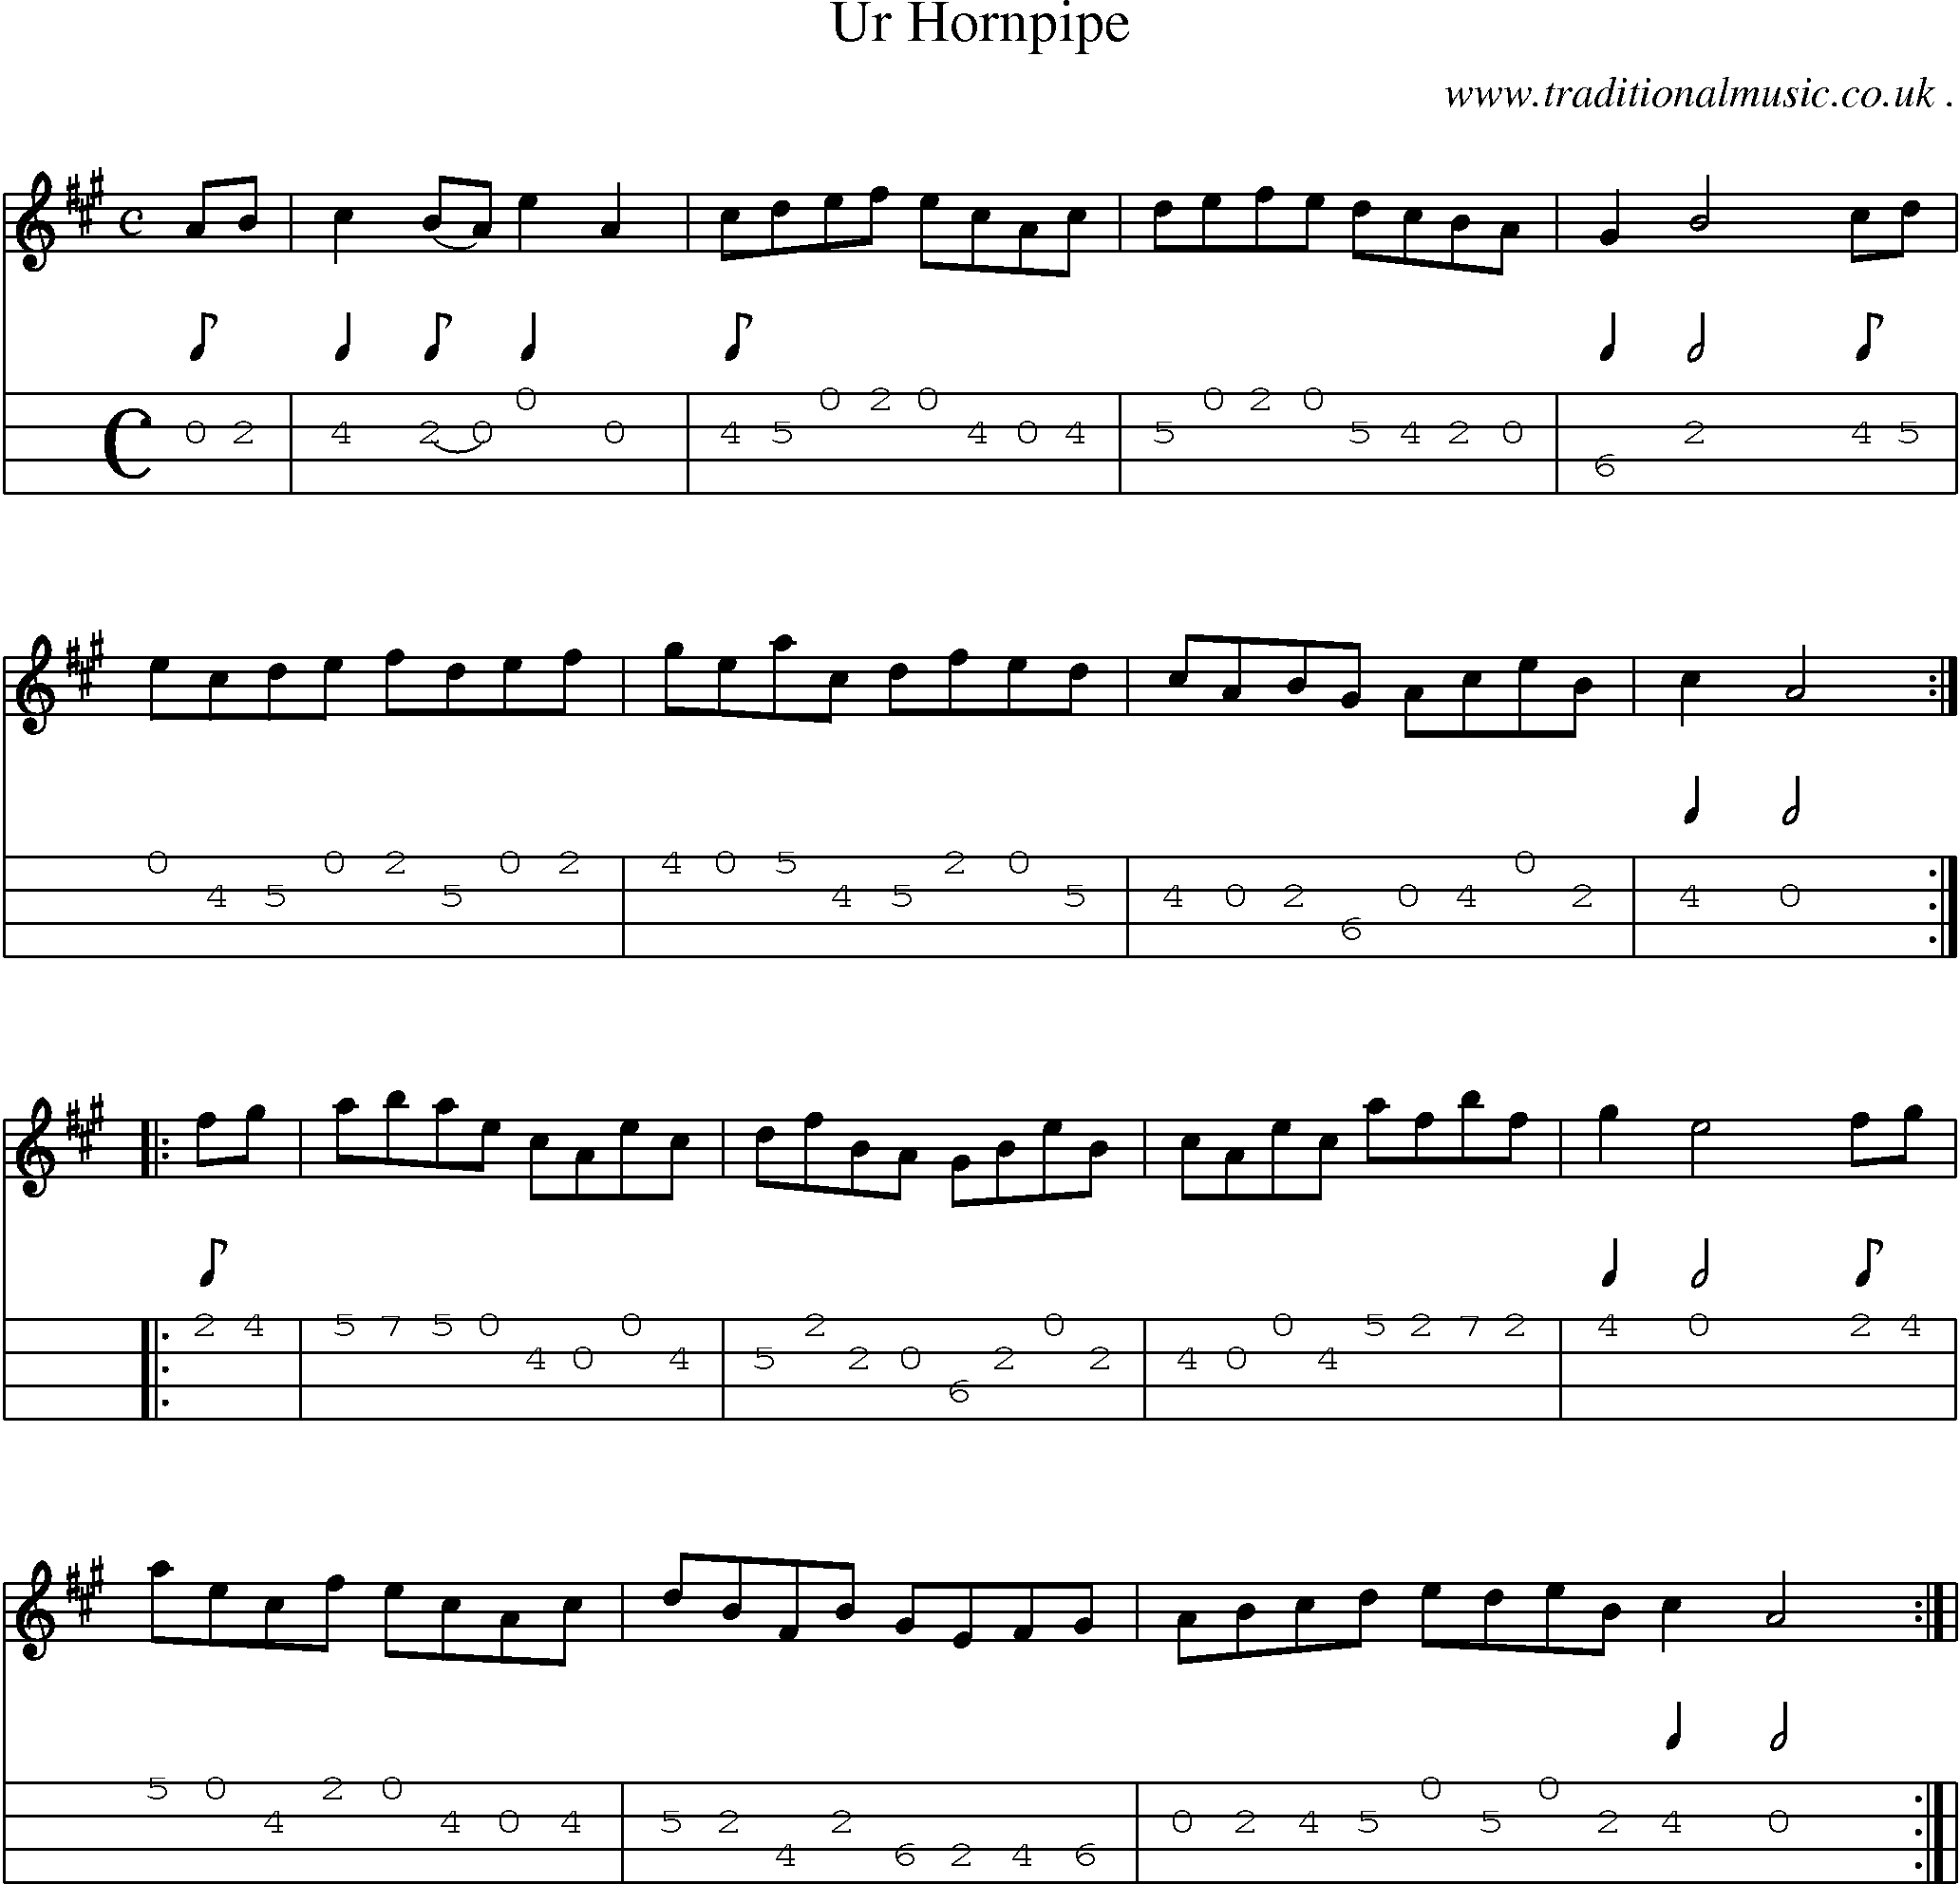 Sheet-Music and Mandolin Tabs for Ur Hornpipe